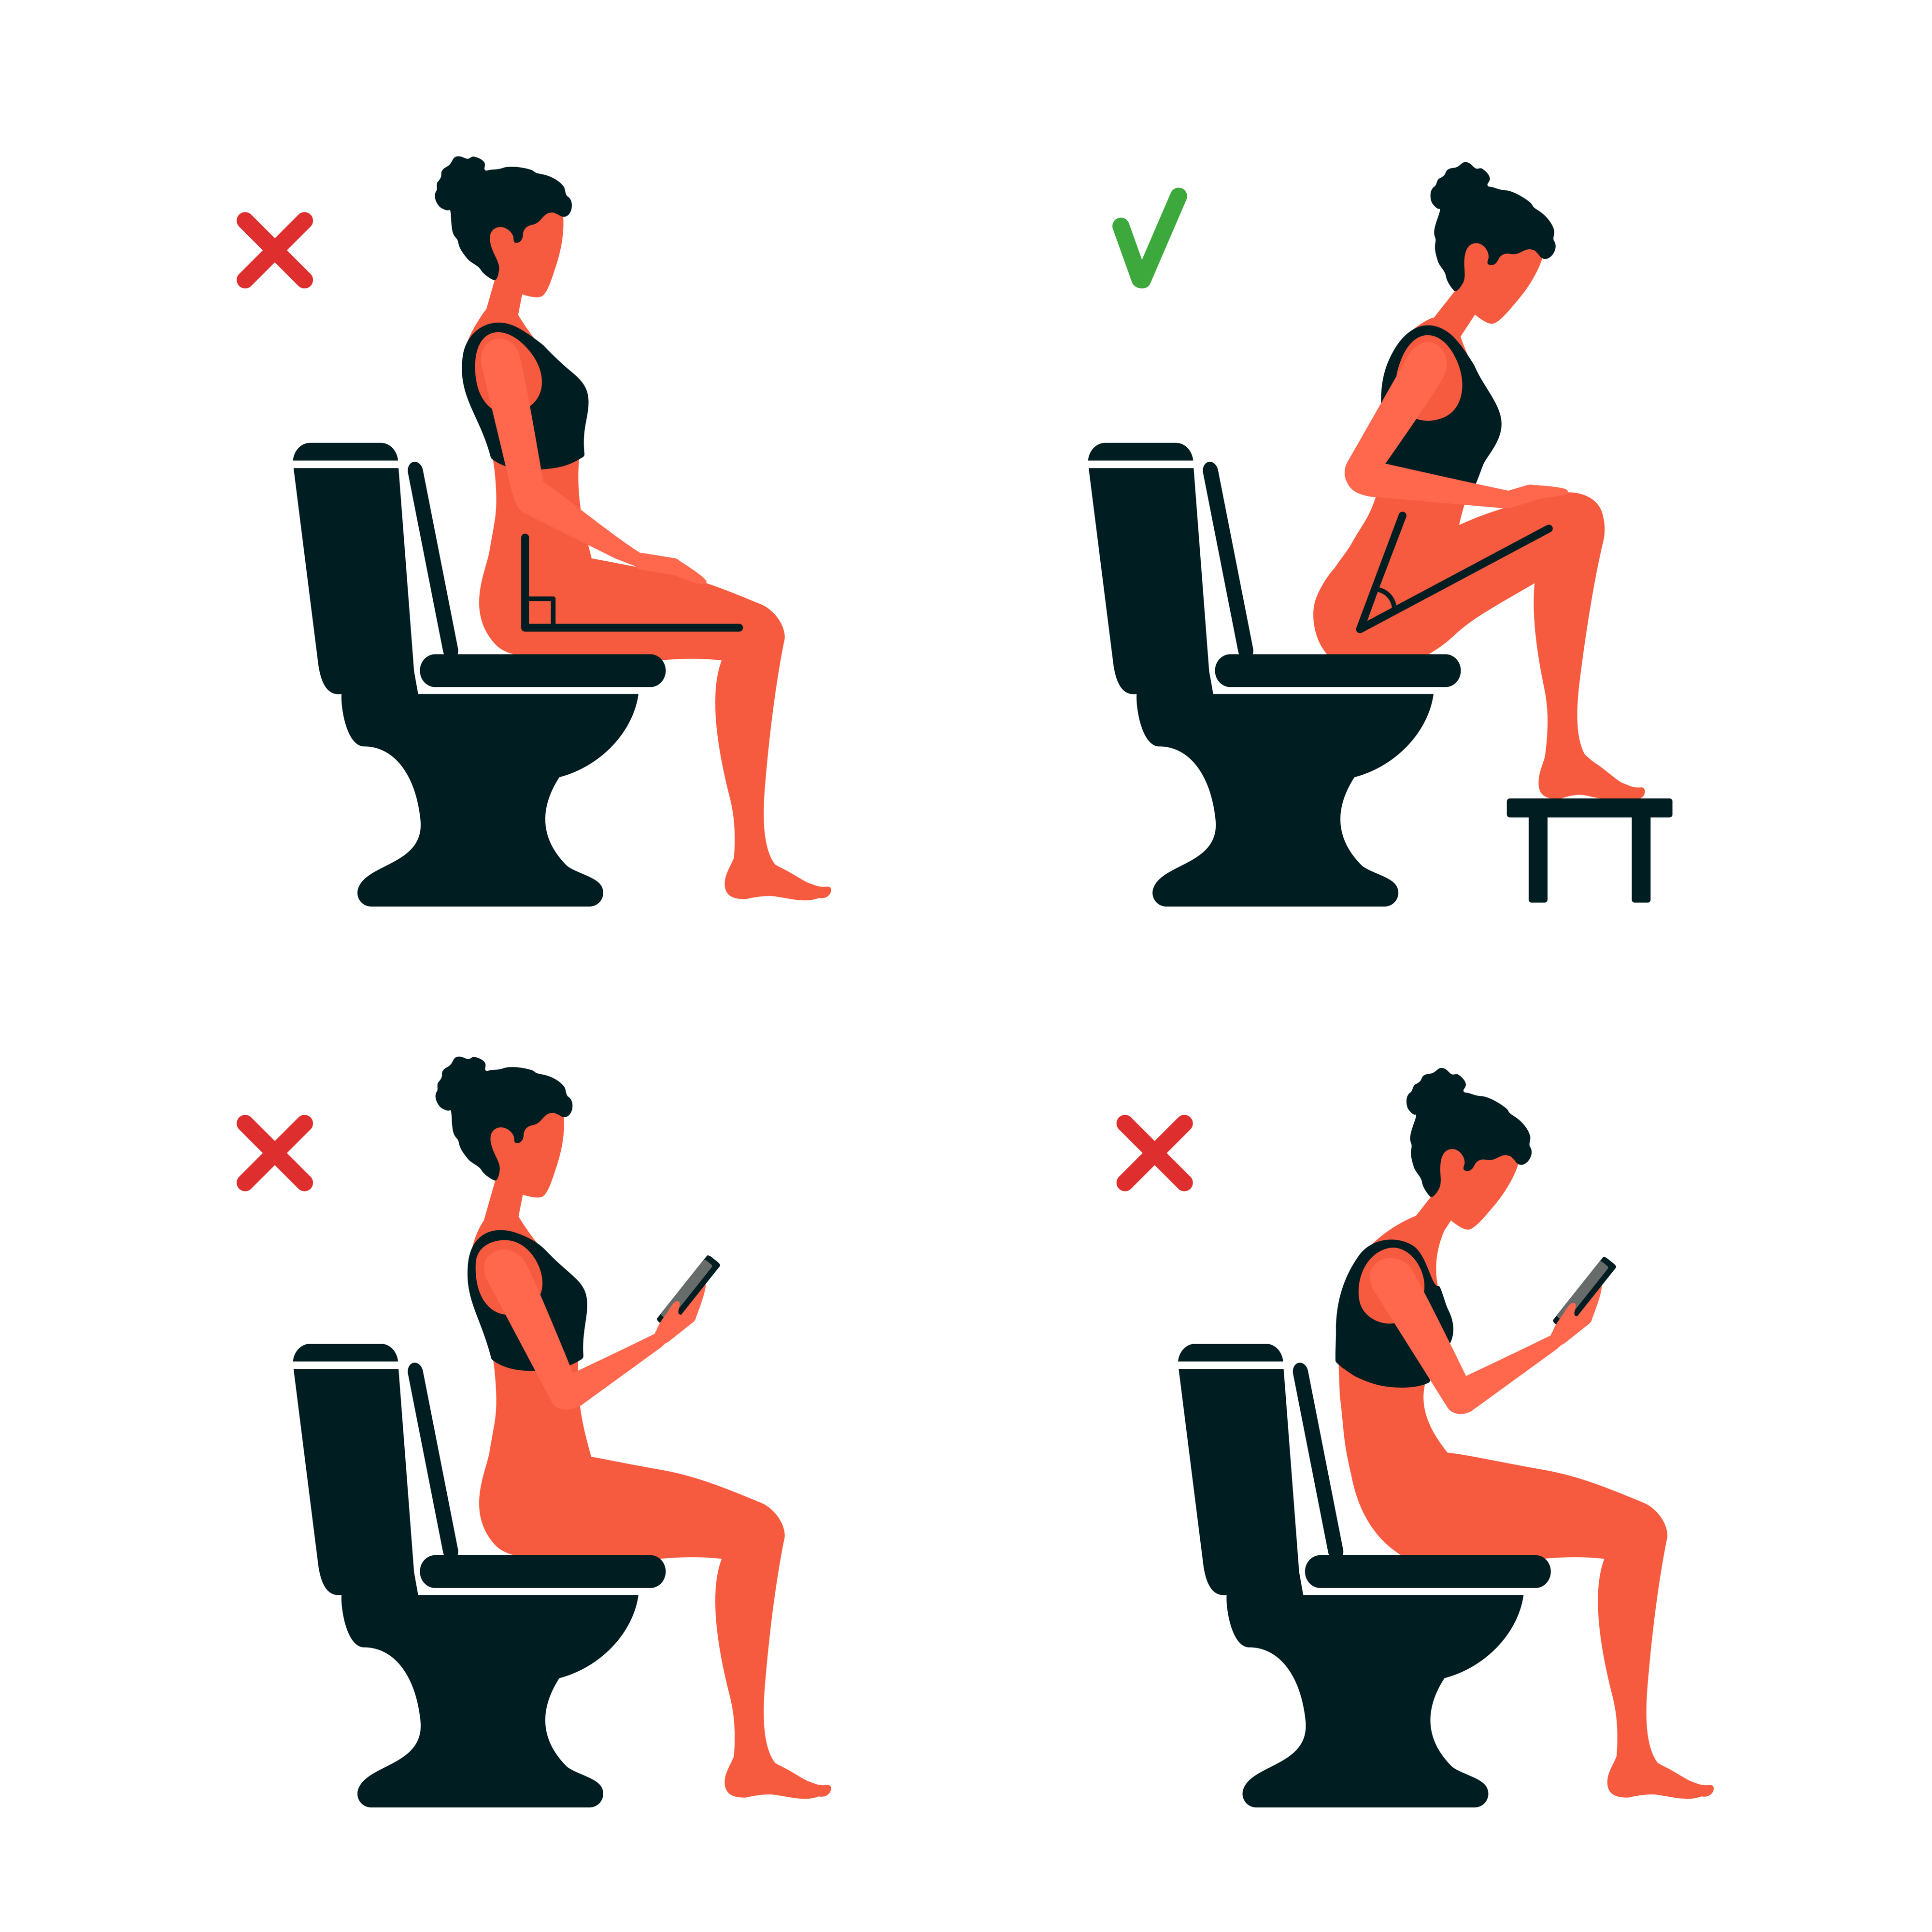 Illustrations of someone using a stool to squat on the toilet